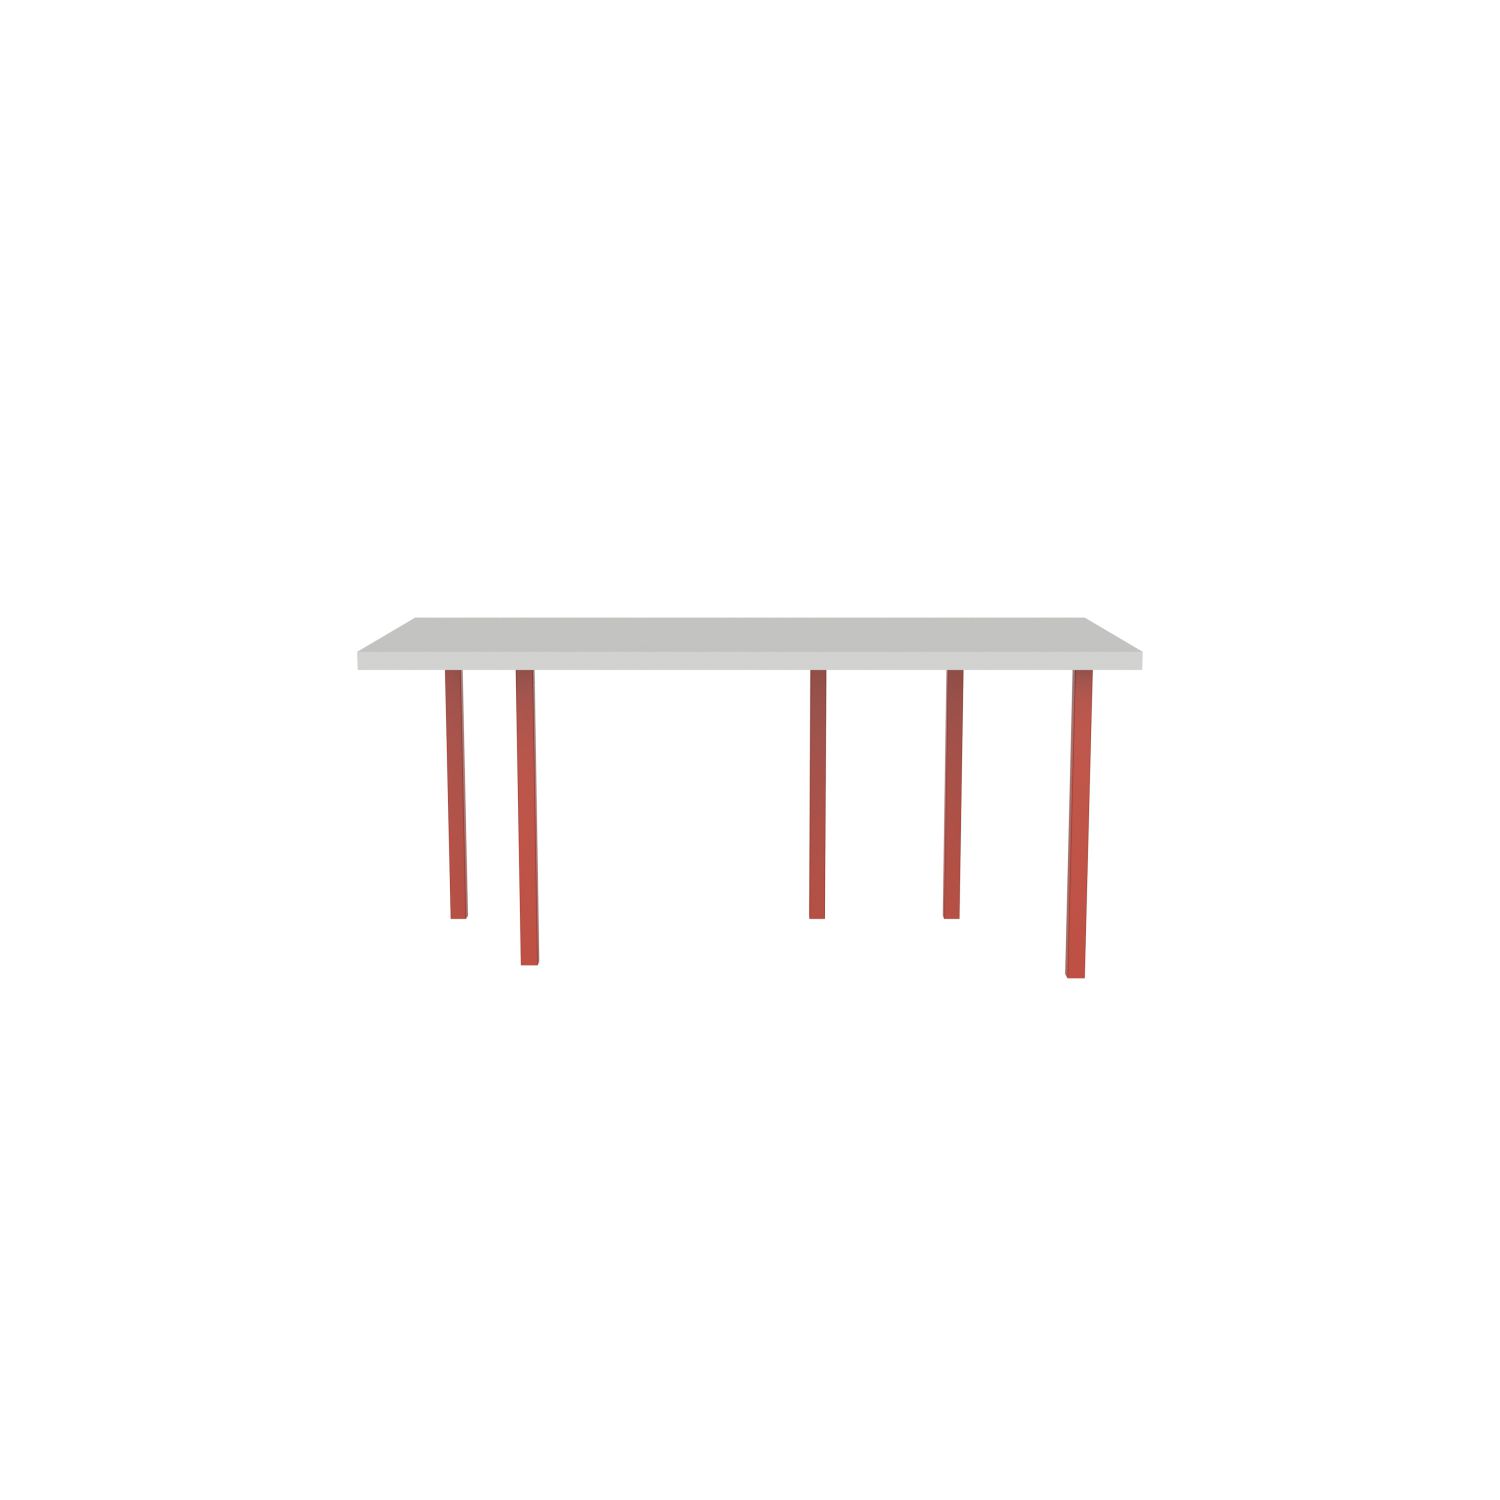 lensvelt bbrand table five fixed heigt 80x172 hpl white 50 mm price level 1 vermilion red ral2002